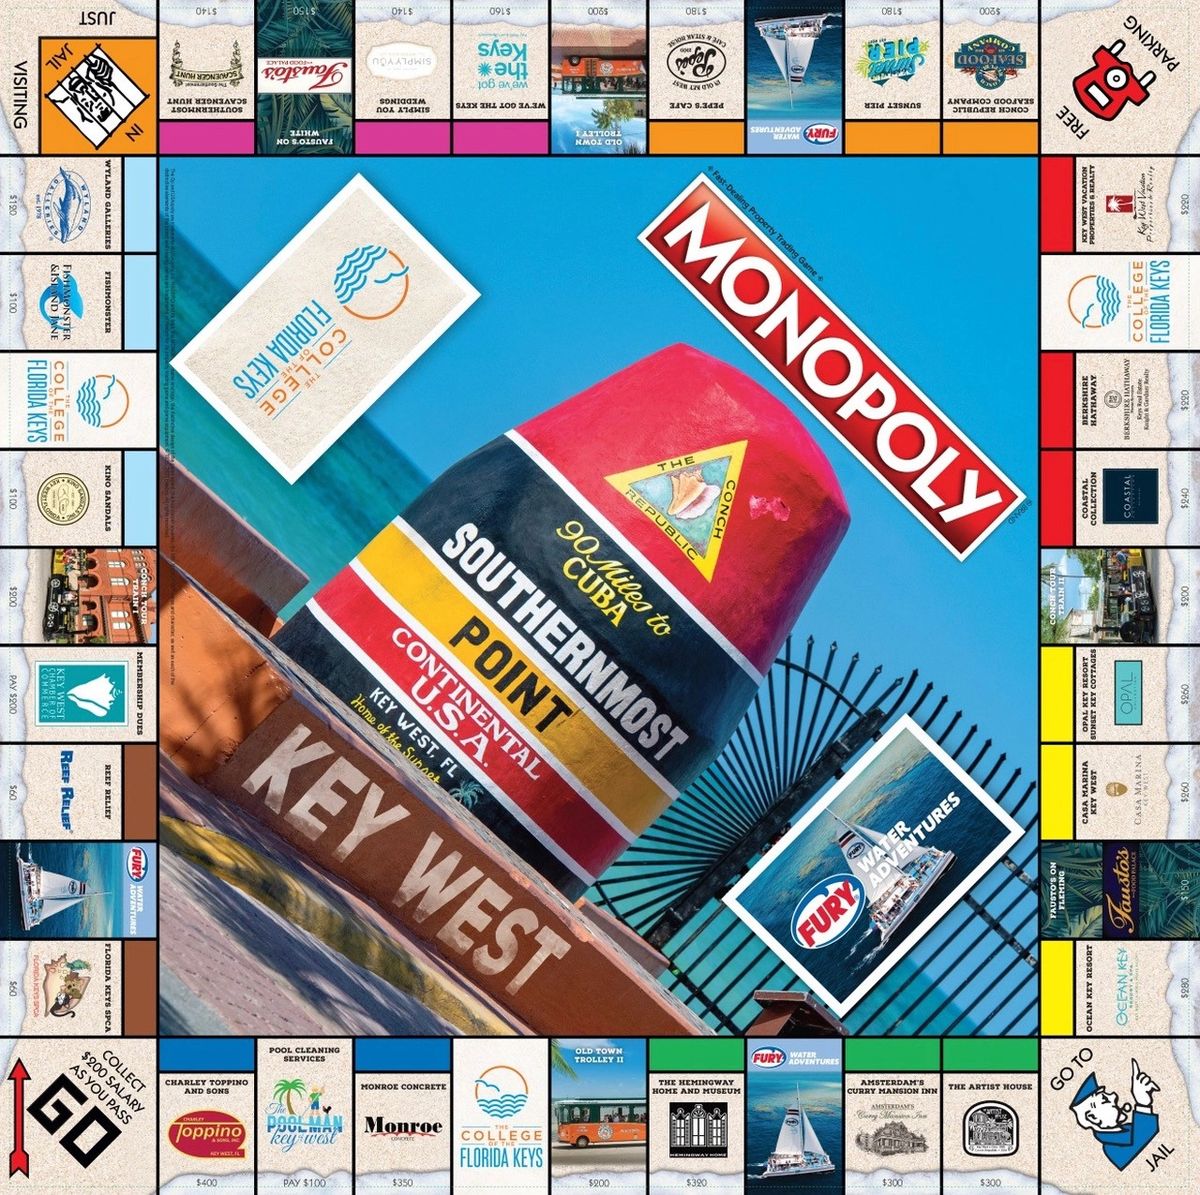 MONOPOLY: City of Key West